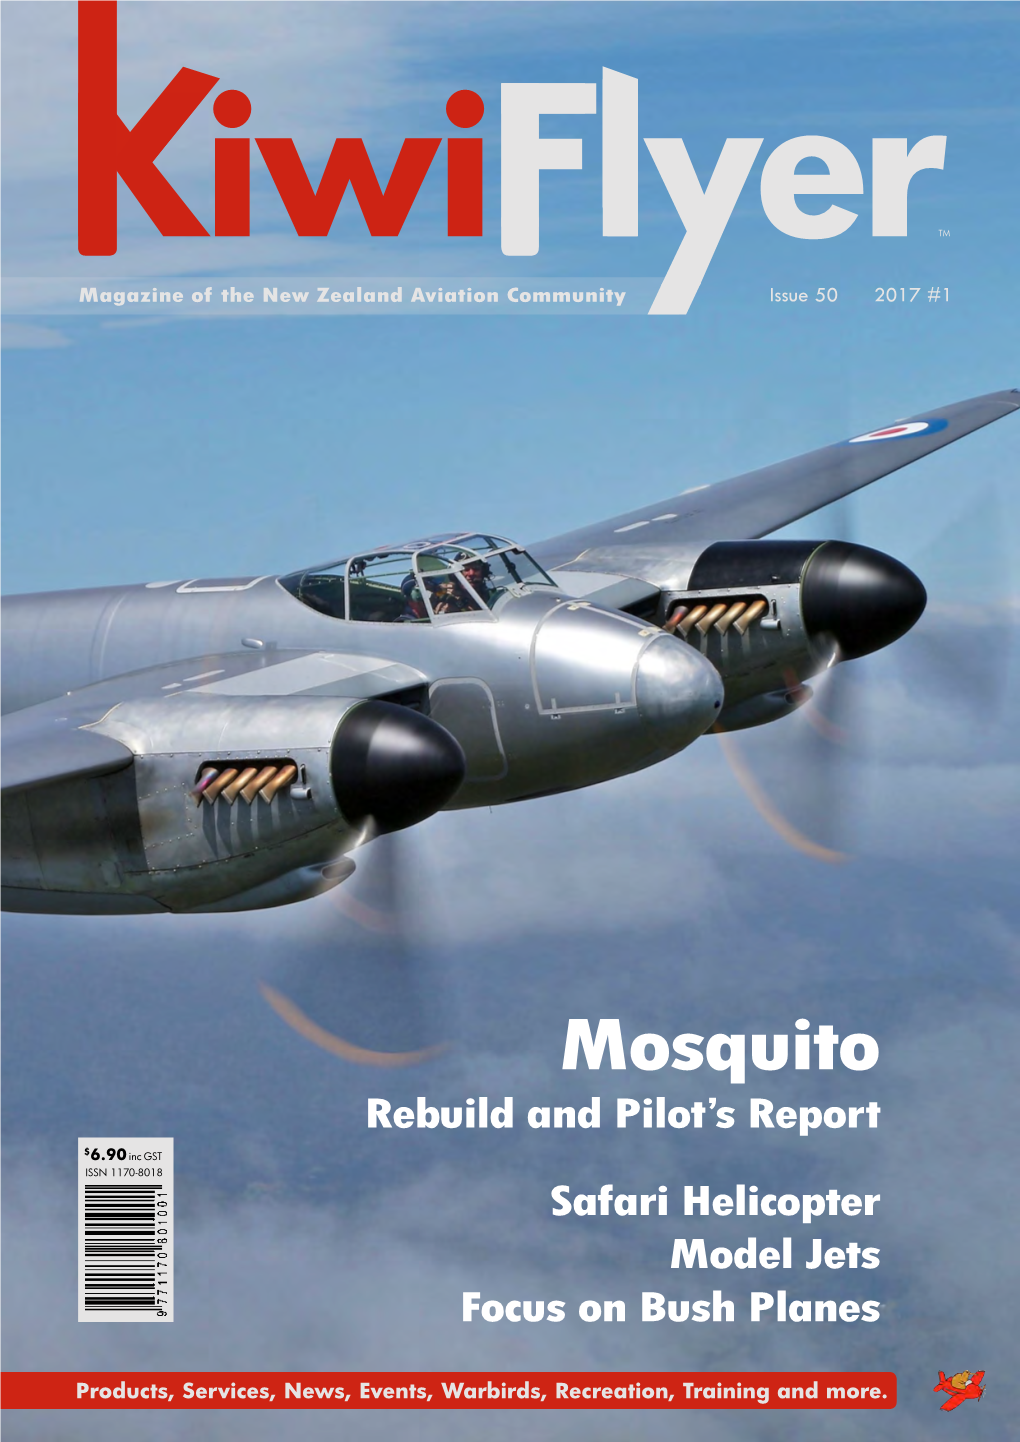 Mosquito Rebuild and Pilot’S Report $ 6.90 Inc GST ISSN 1170-8018 Safari Helicopter Model Jets Focus on Bush Planes